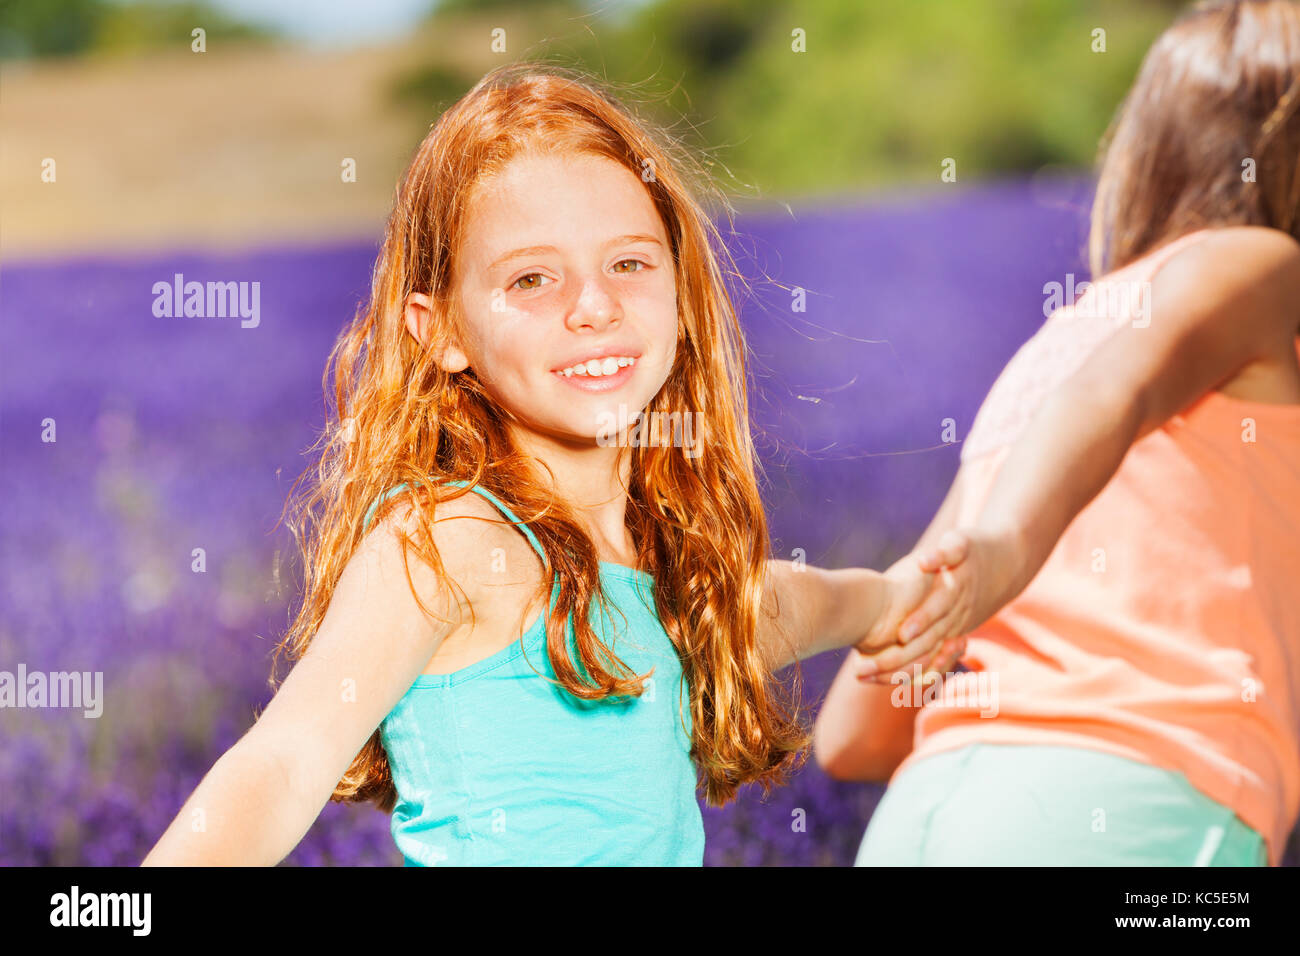 Portrait of preteen red-headed girl holding hand of her friend while walking in lavender field Stock Photo